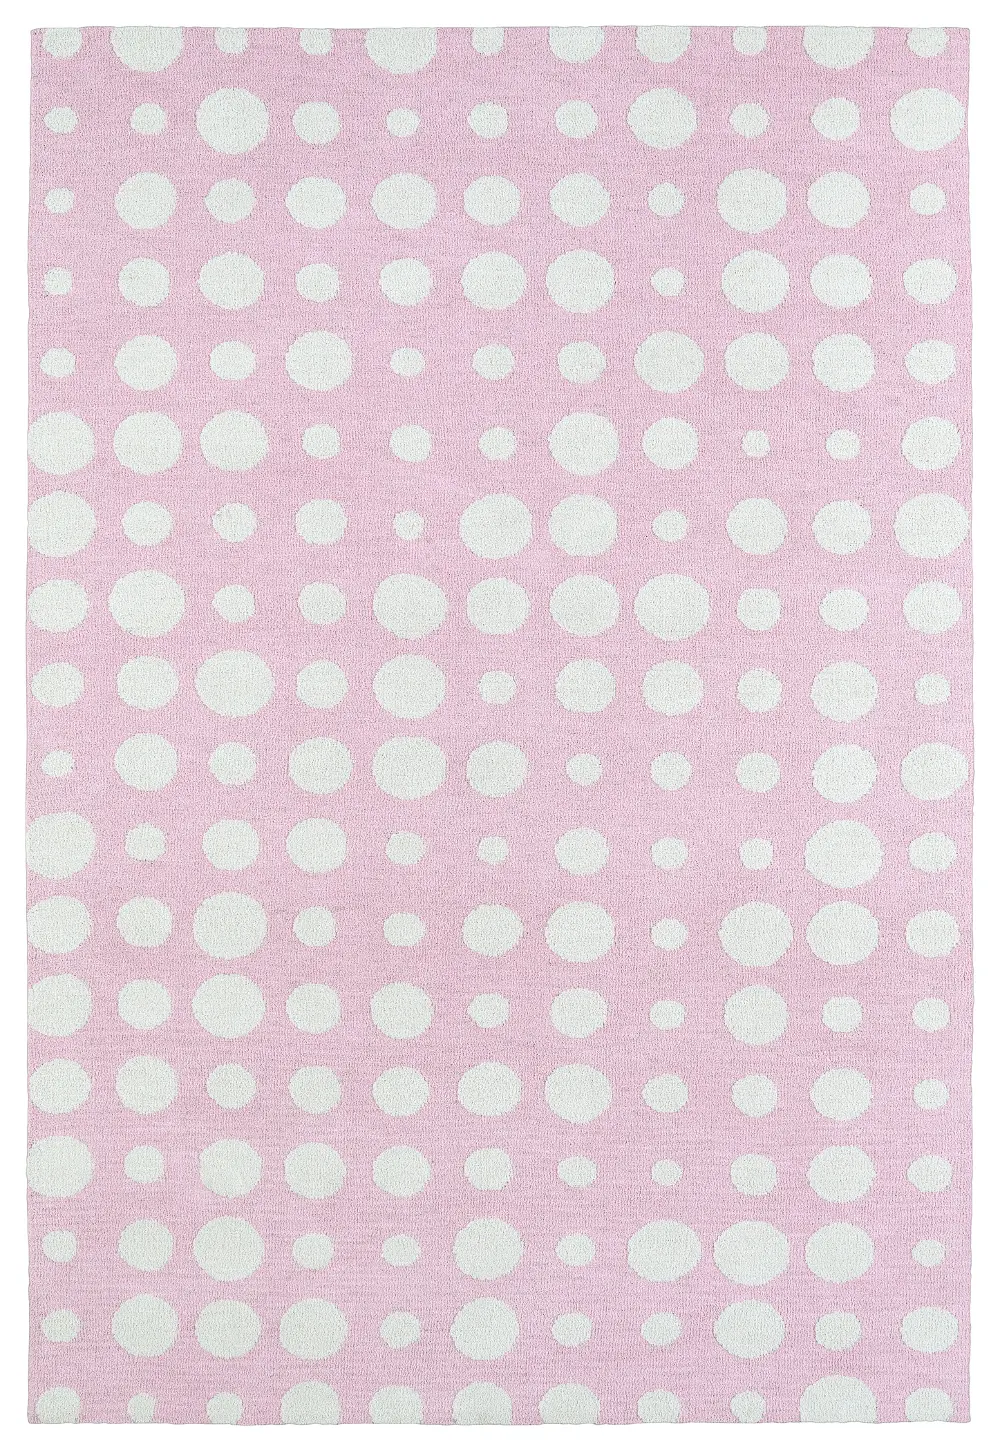 4 x 6 Small Dotted Pink and Ivory Area Rug - Lily & Liam-1